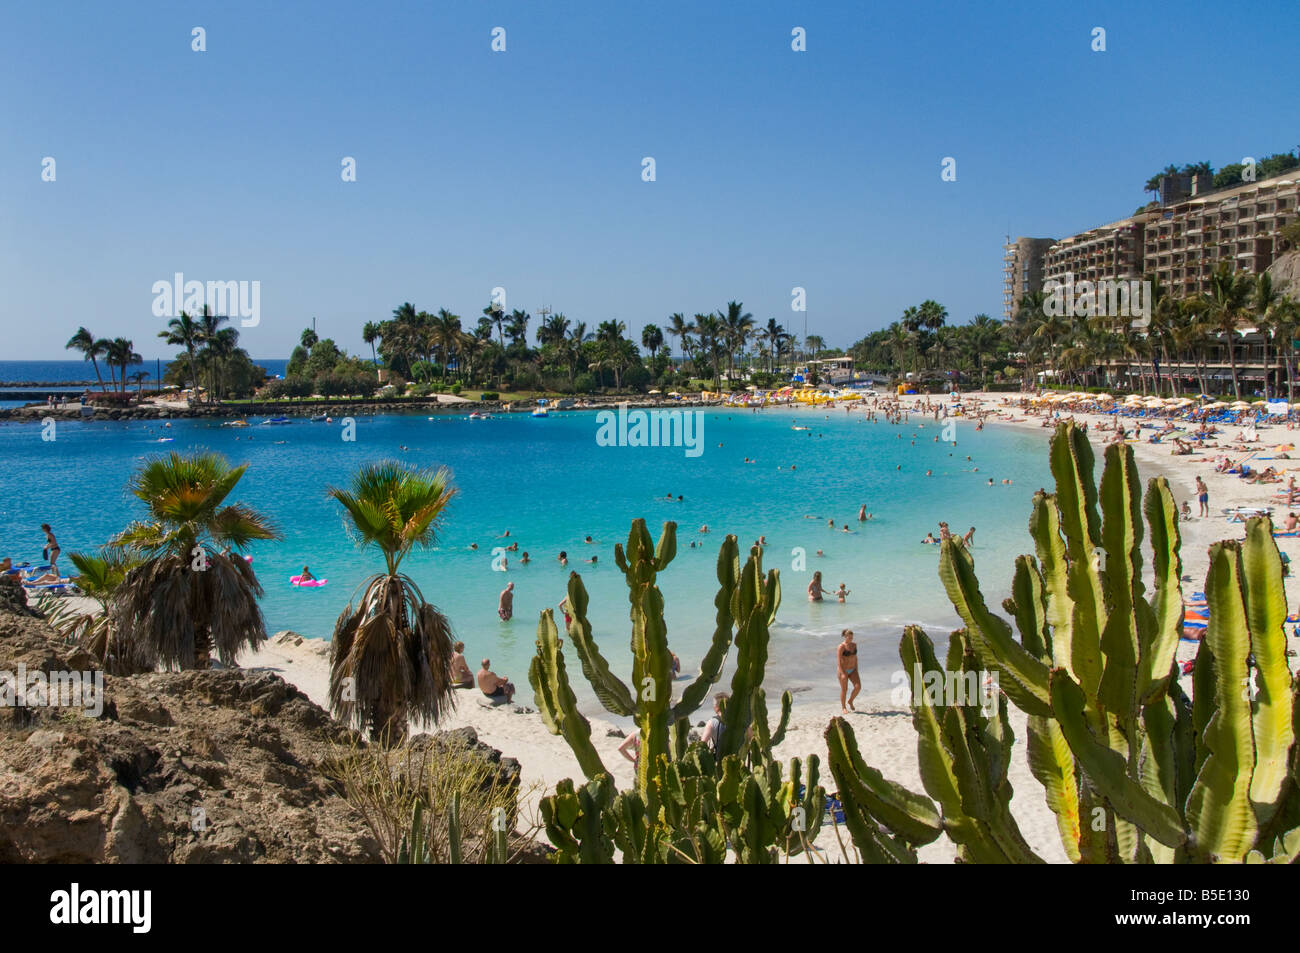 GRAN CANARIA Anfi beach luxury sandy beach resort with exotic cacti in foreground Gran Canaria Canary Islands Spain Stock Photo